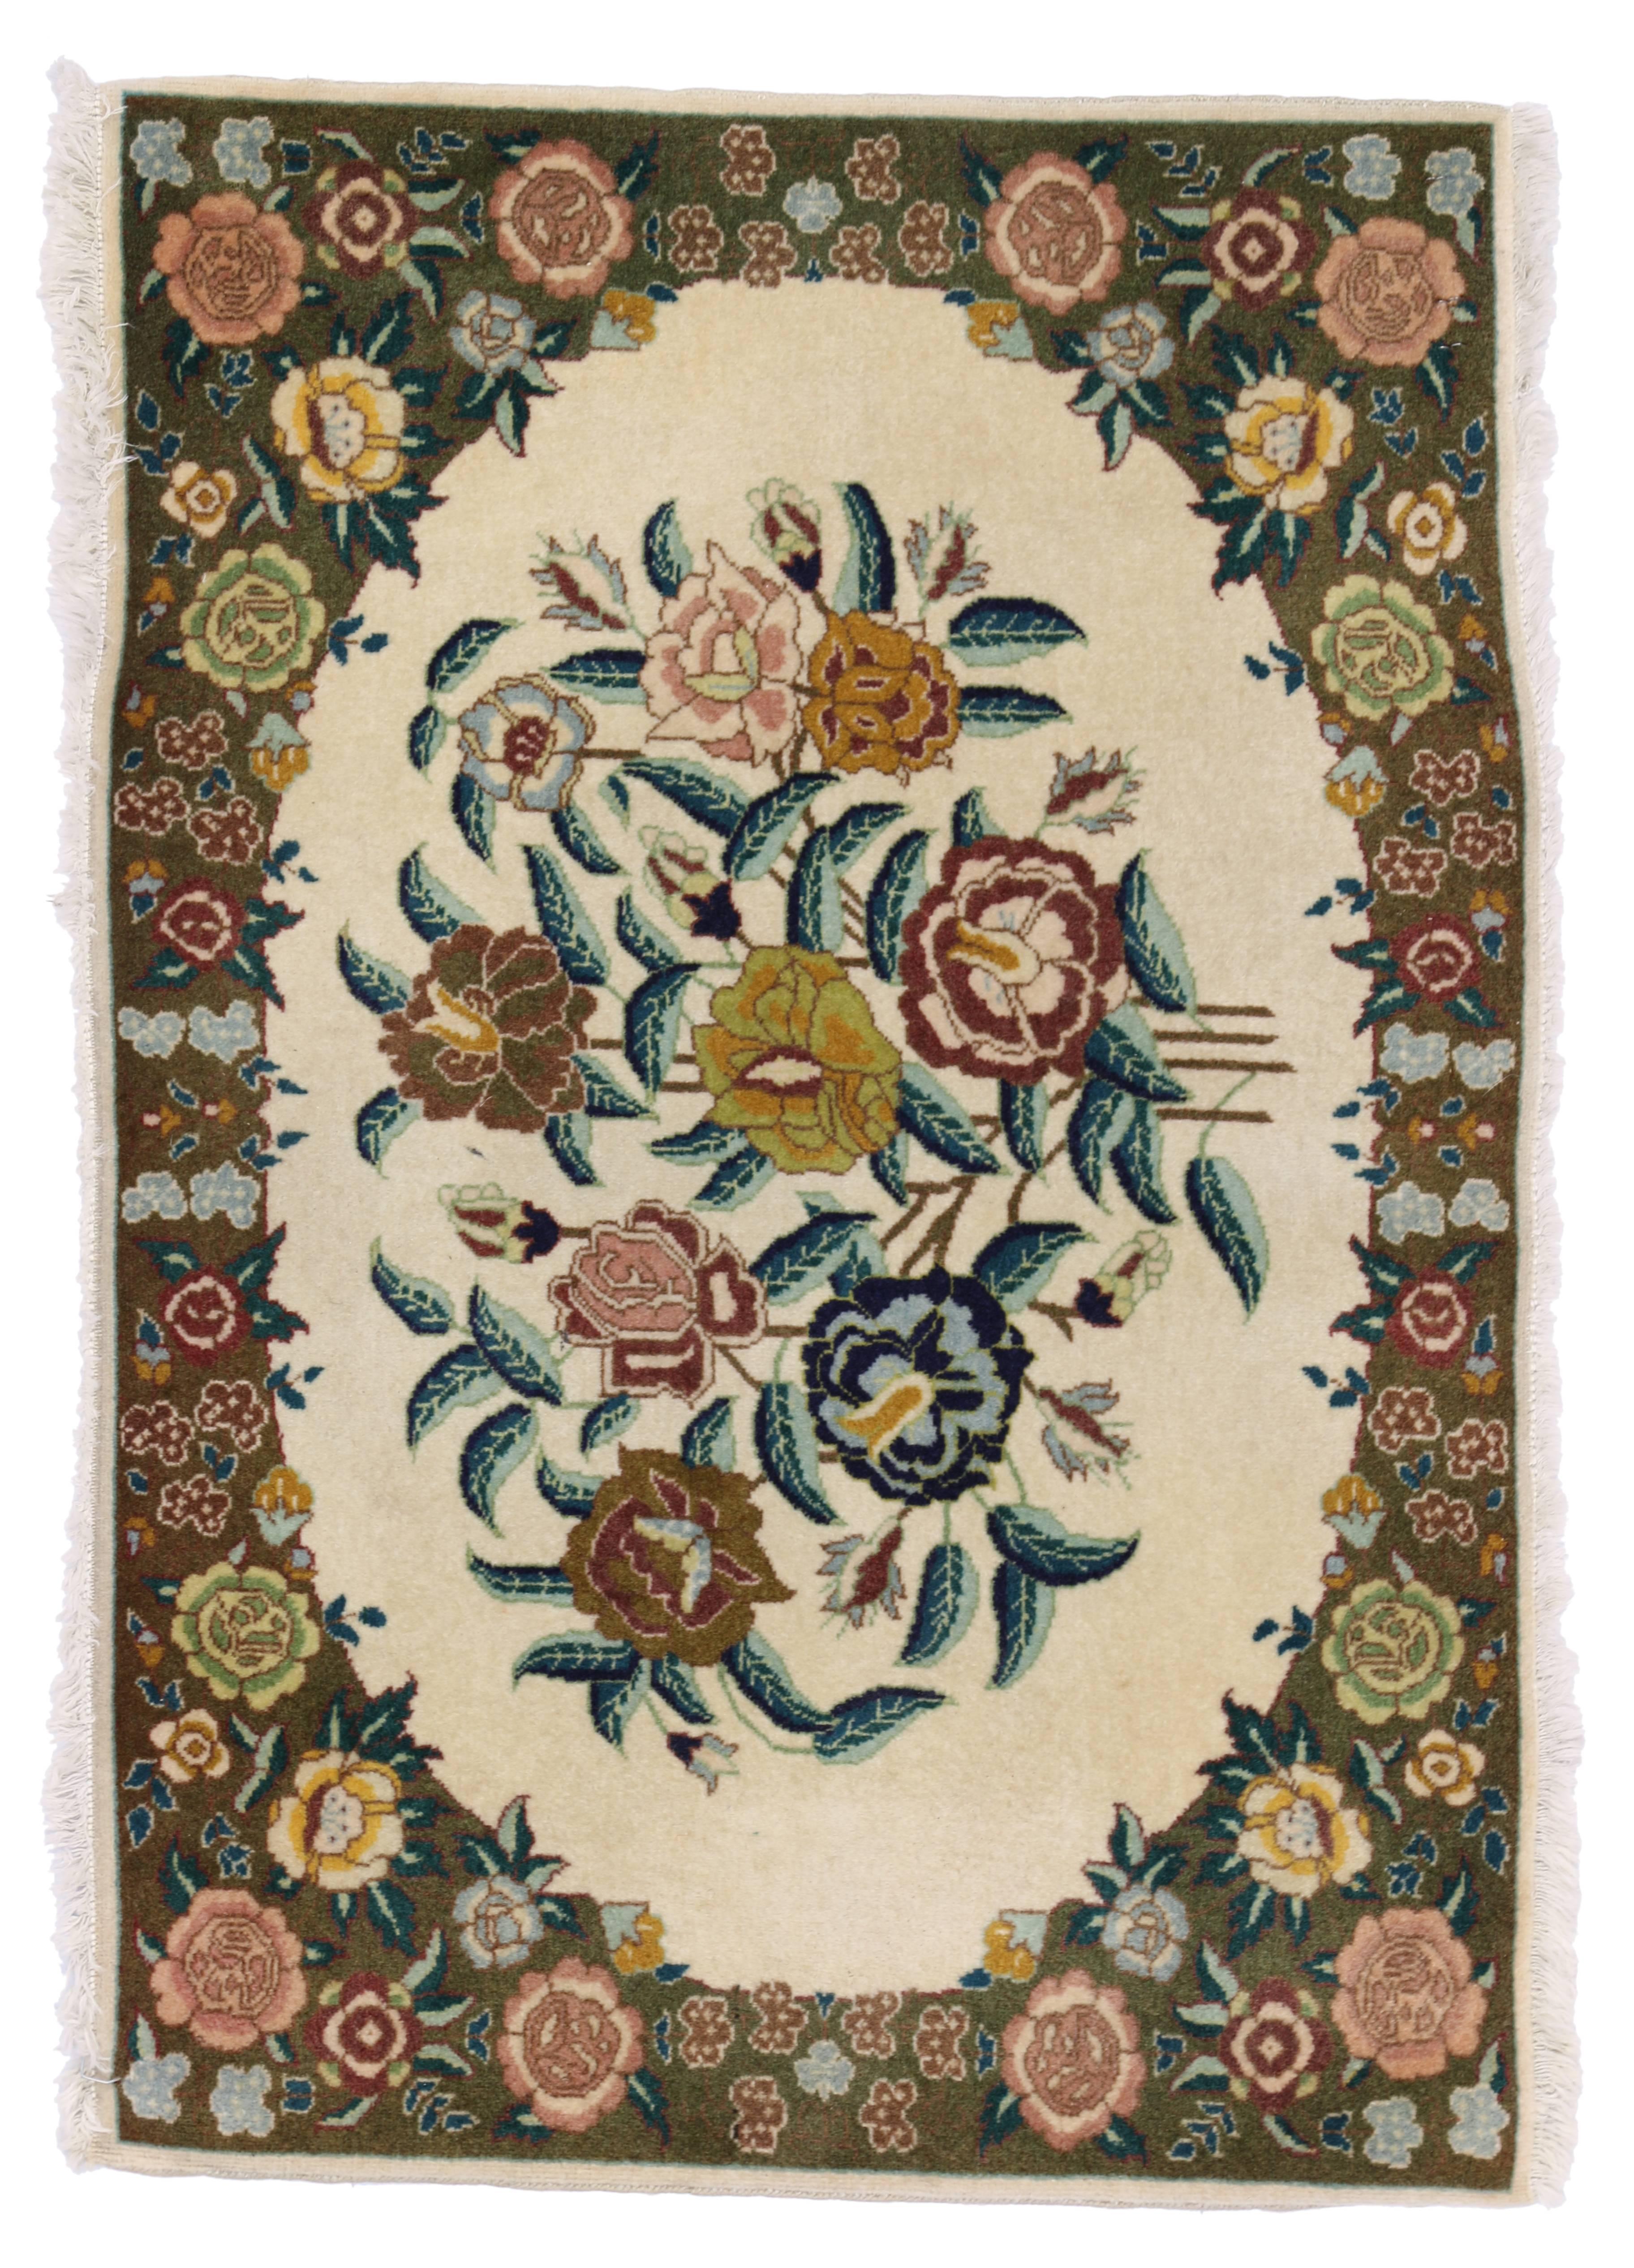 75655 vintage Persian Tabriz rug with traditional style. This hand-knotted wool vintage Persian Tabriz rug features a floral bouquet in a creamy vanilla field surrounded by a complementary floral border creating a well-balanced and timeless design.